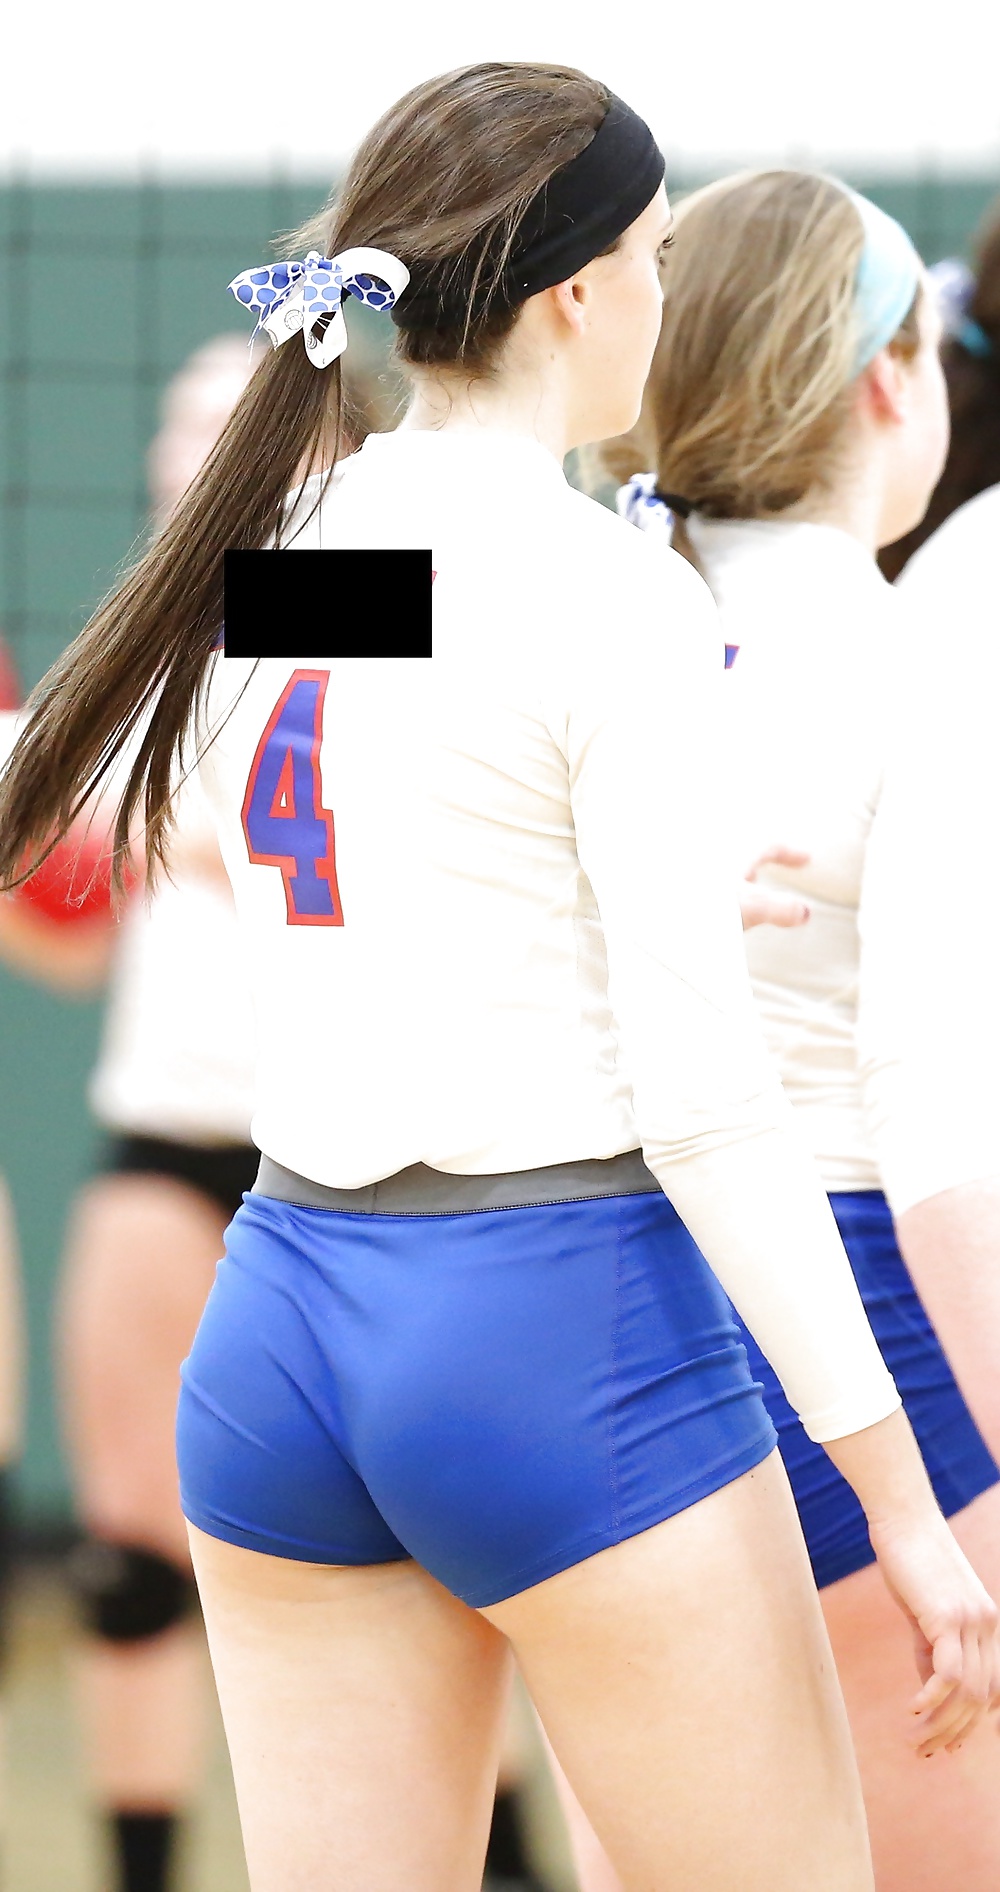 Porn Pics Volleyball Asses - Spandex